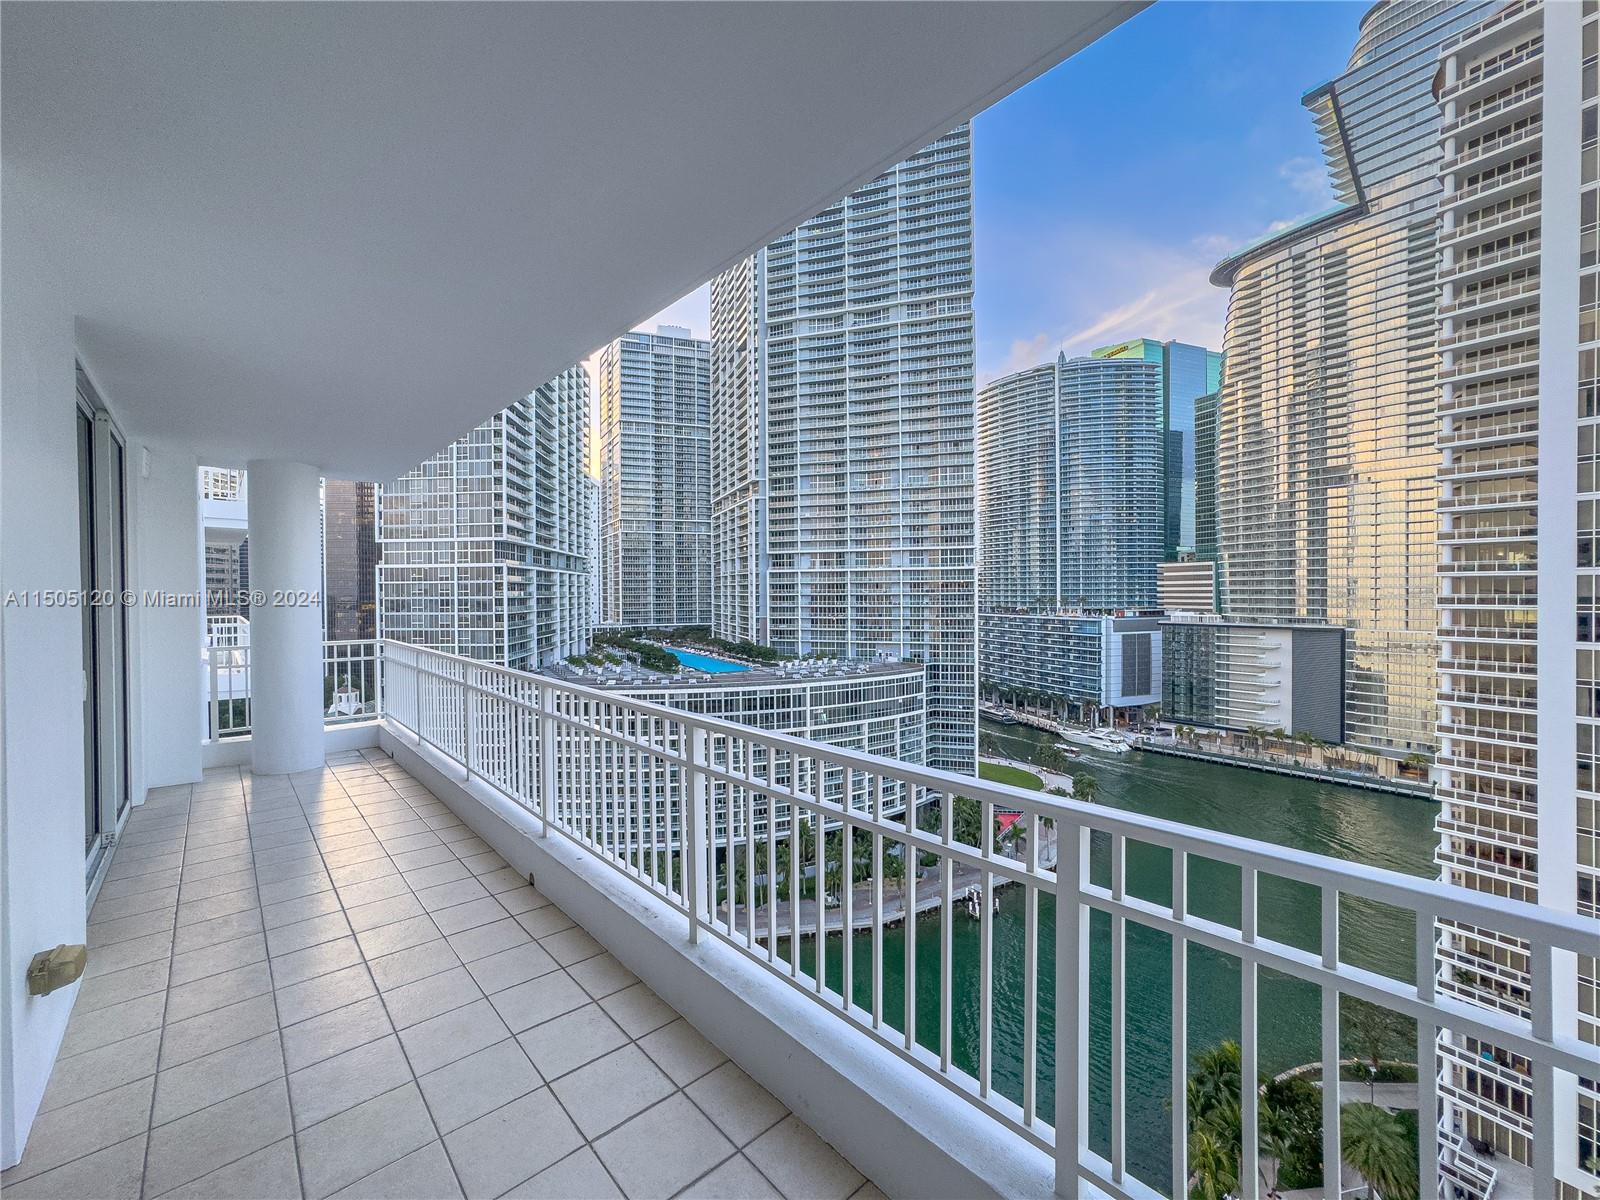 Discover luxury living at Courts Brickell Key, Miami. This spacious 3 bed, 3 bath unit boasts breathtaking bay and skyline views, spanning 1,493 sq ft. Offering versatile furnishing options, it caters to all preferences. Embrace the opportunity to reside in one of Miami’s most prestigious island communities, blending exclusivity with vibrant city life.